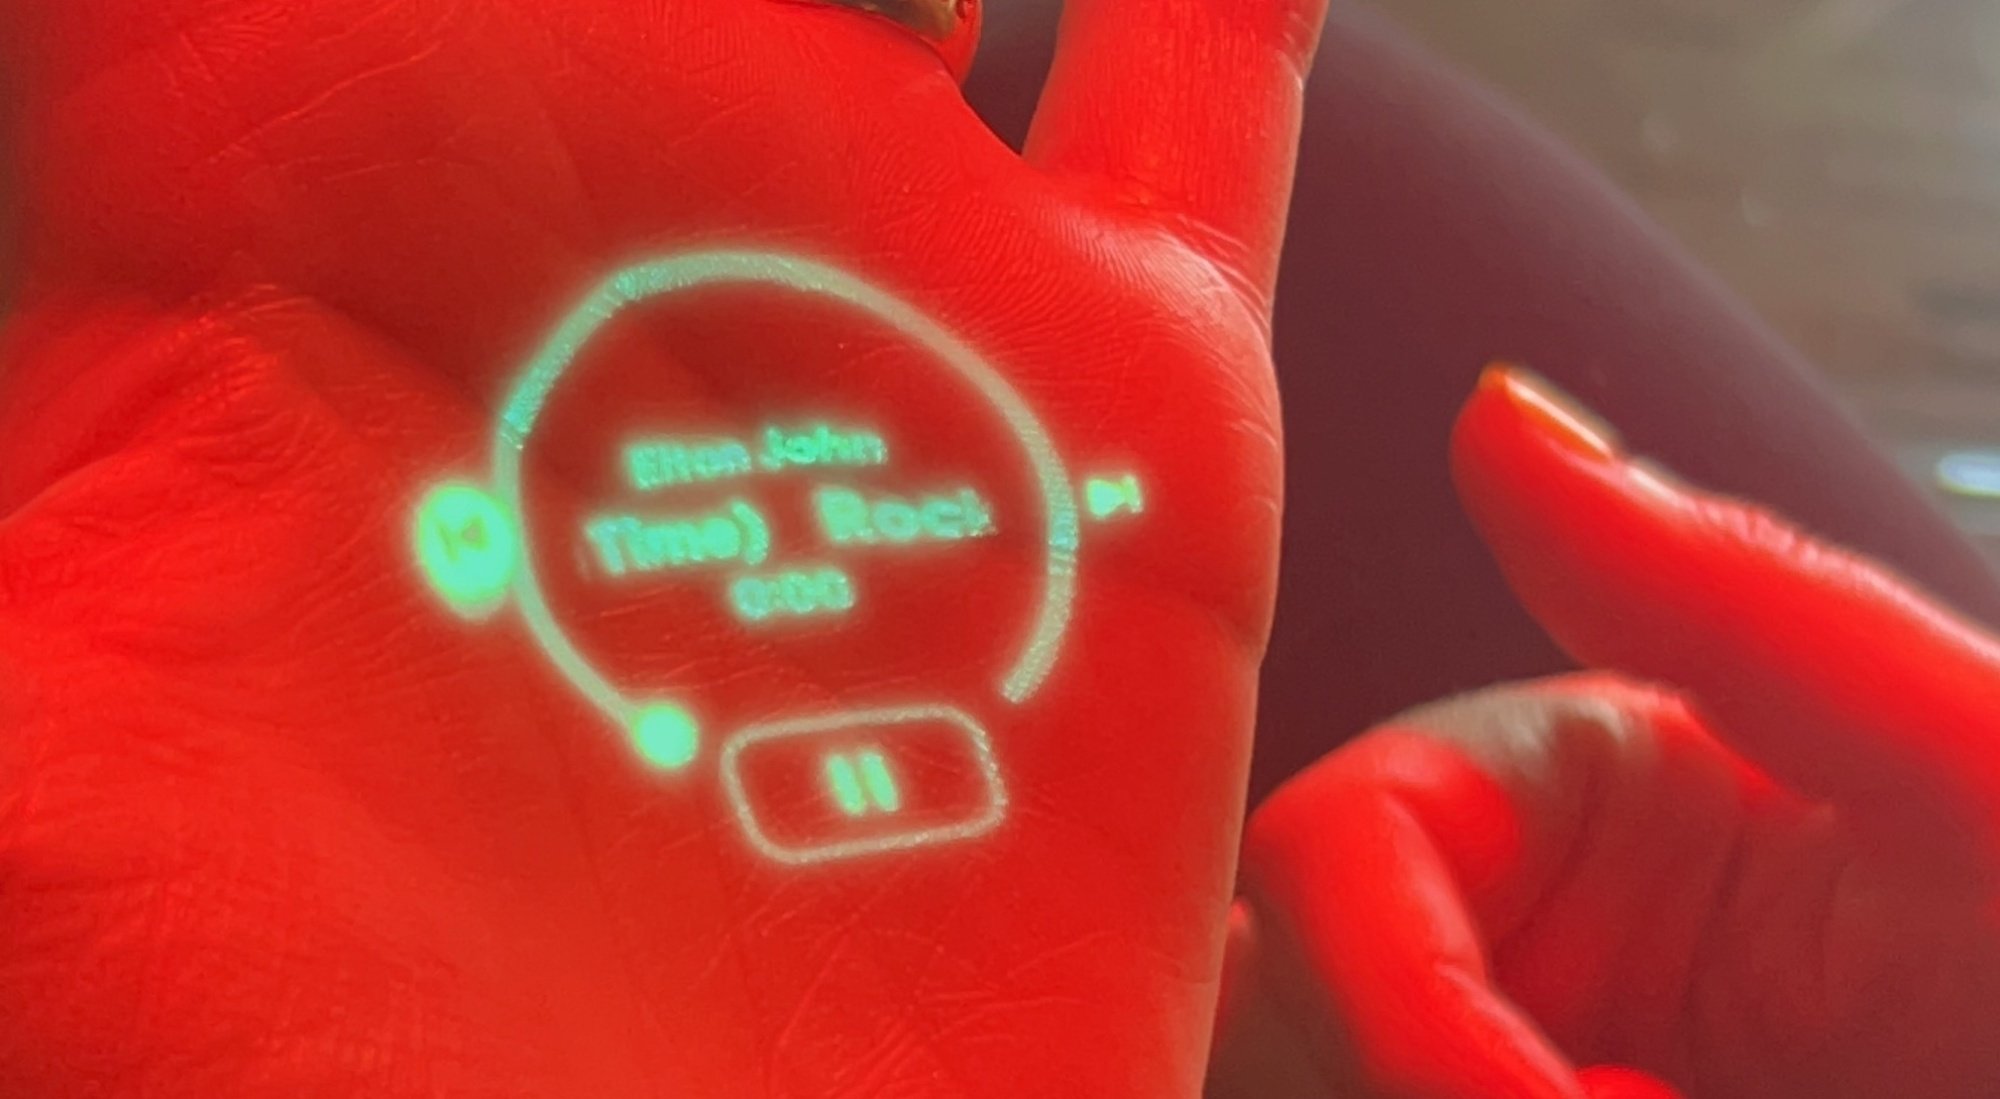 laser projection against the palm of a hand